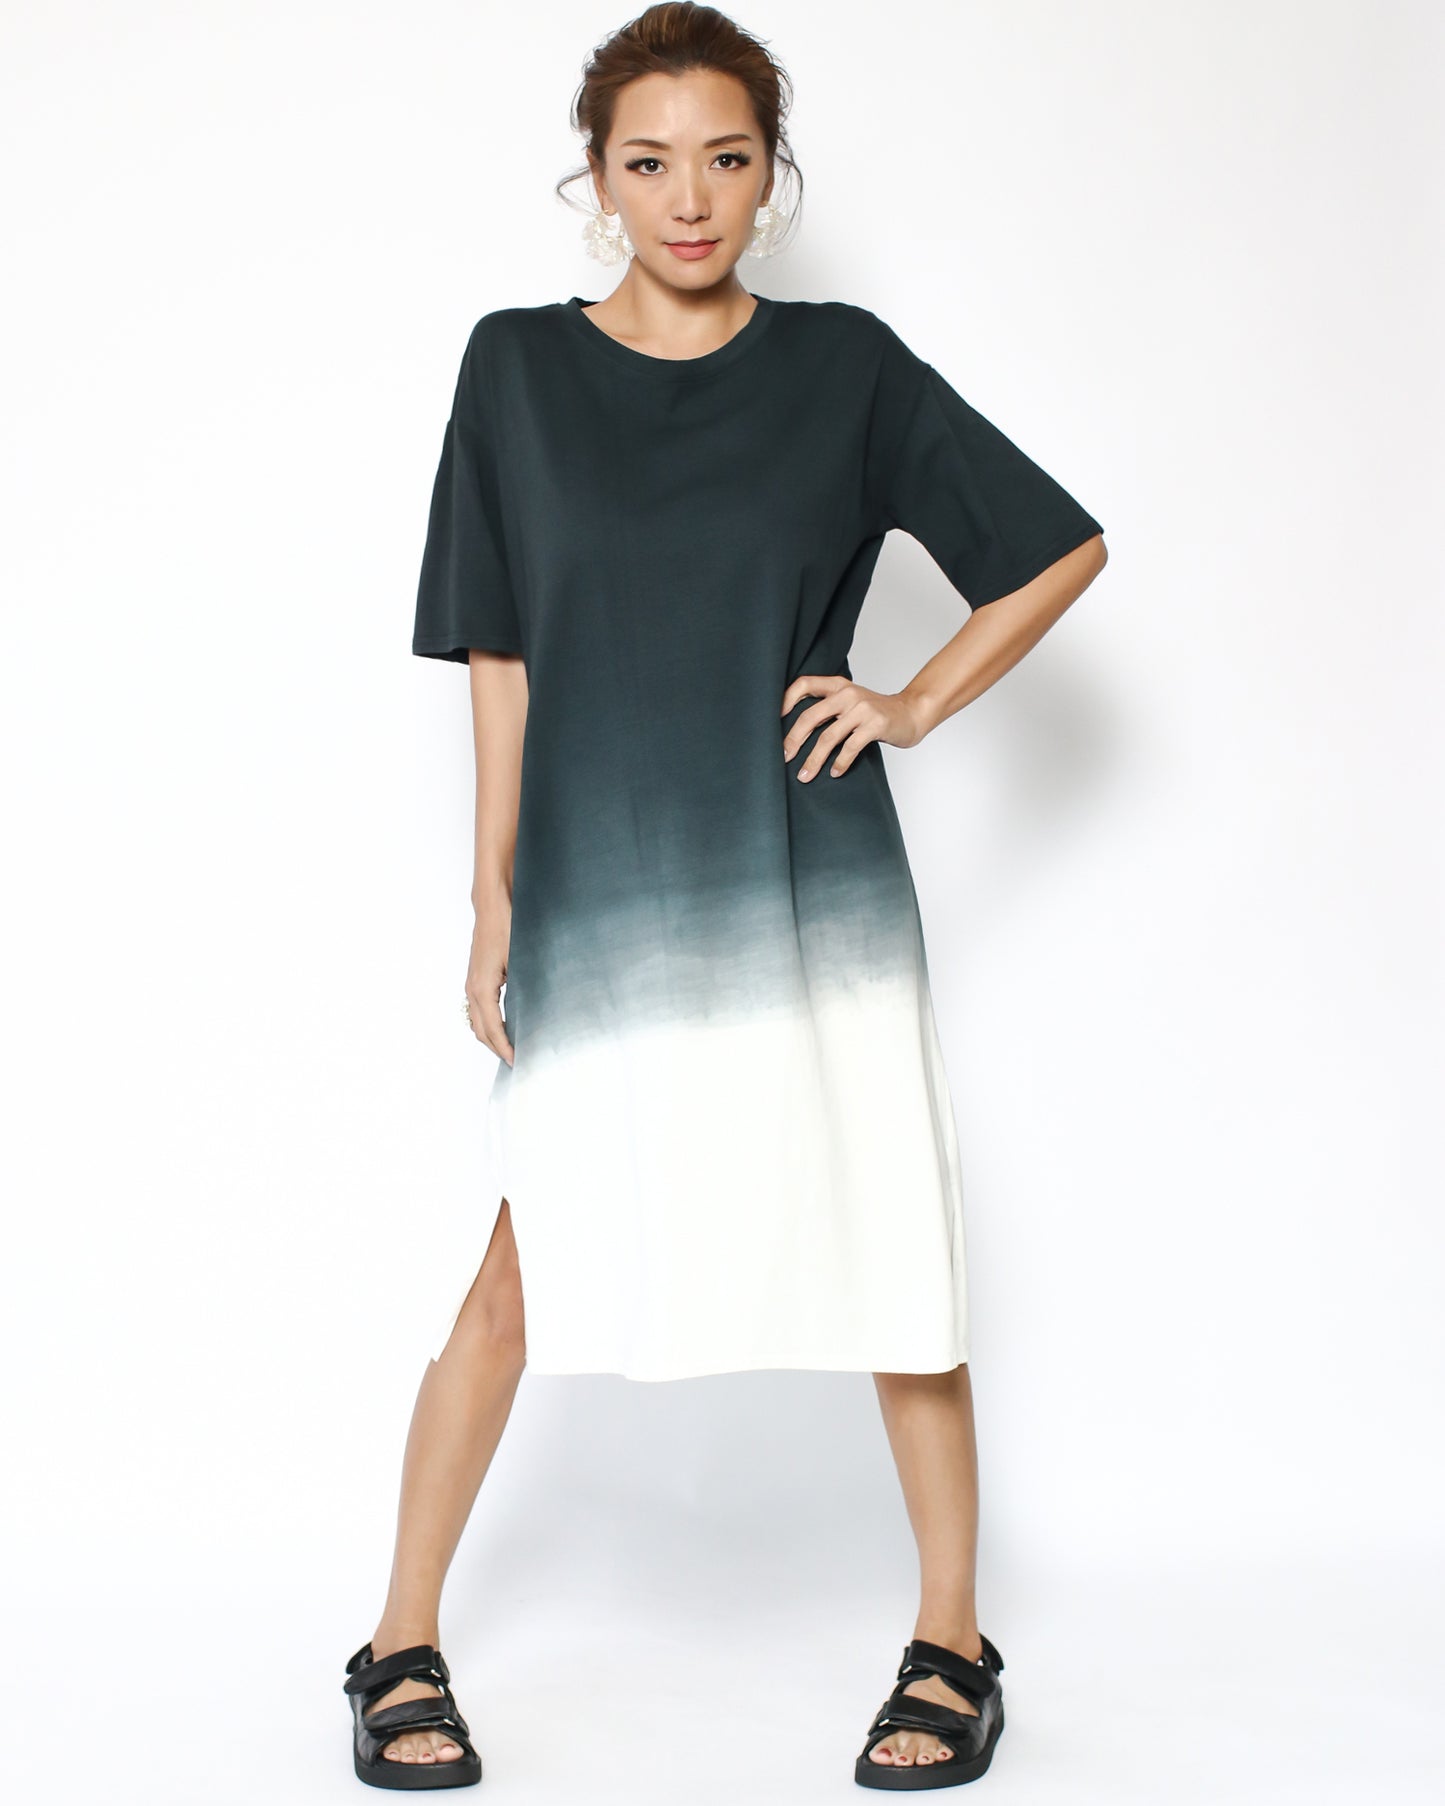 ink ombre midi length tee dress *pre-order*